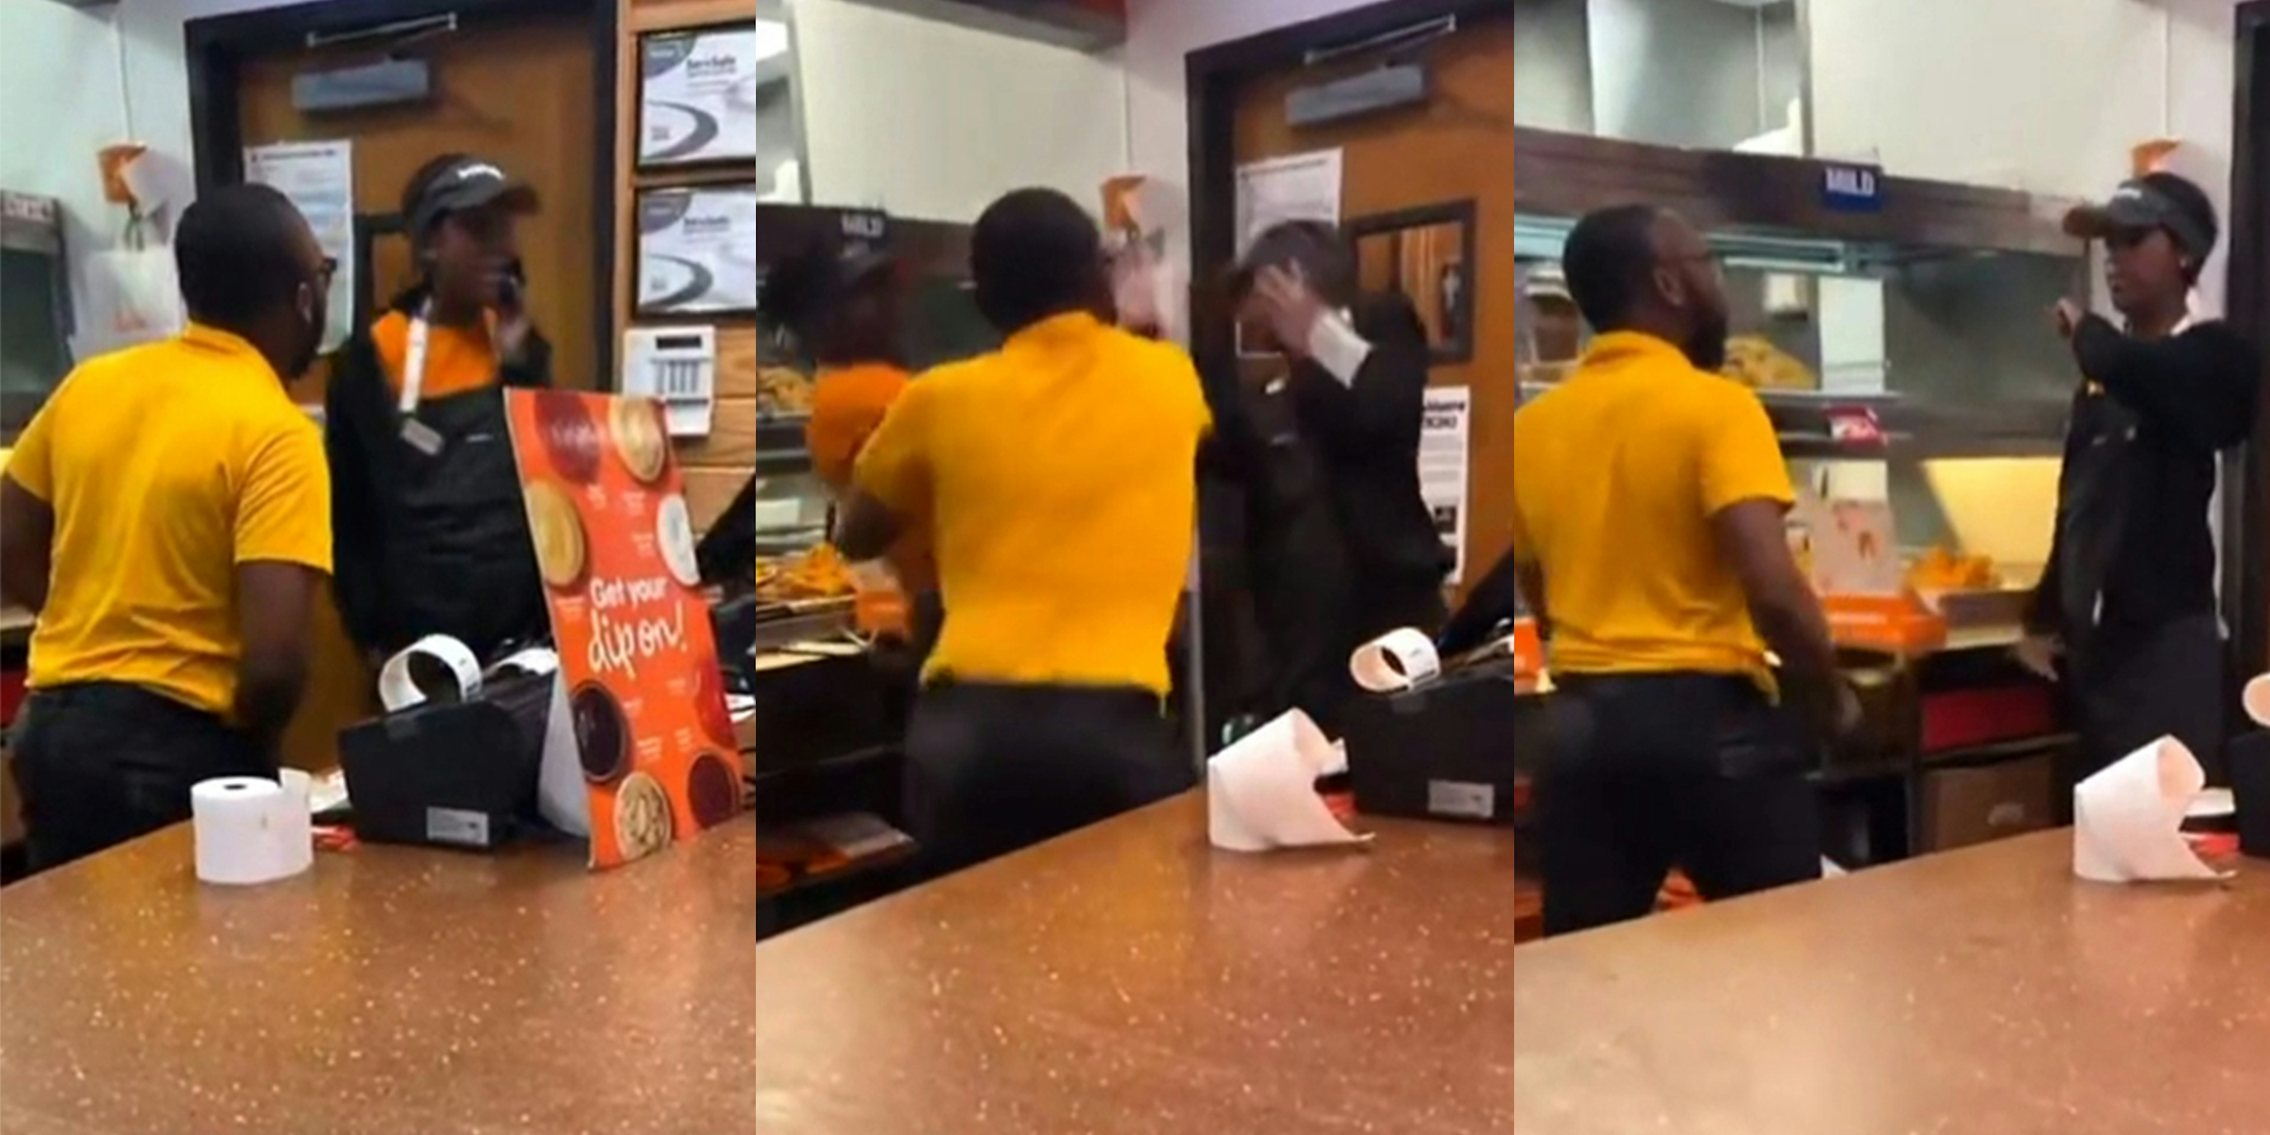 Popeyes employee on phone manager yelling in face (l) Popeyes employee hand up to face other employee bending back manager arm swinging (c) Popeyes manager talking to employee after hit employee hand up (r)